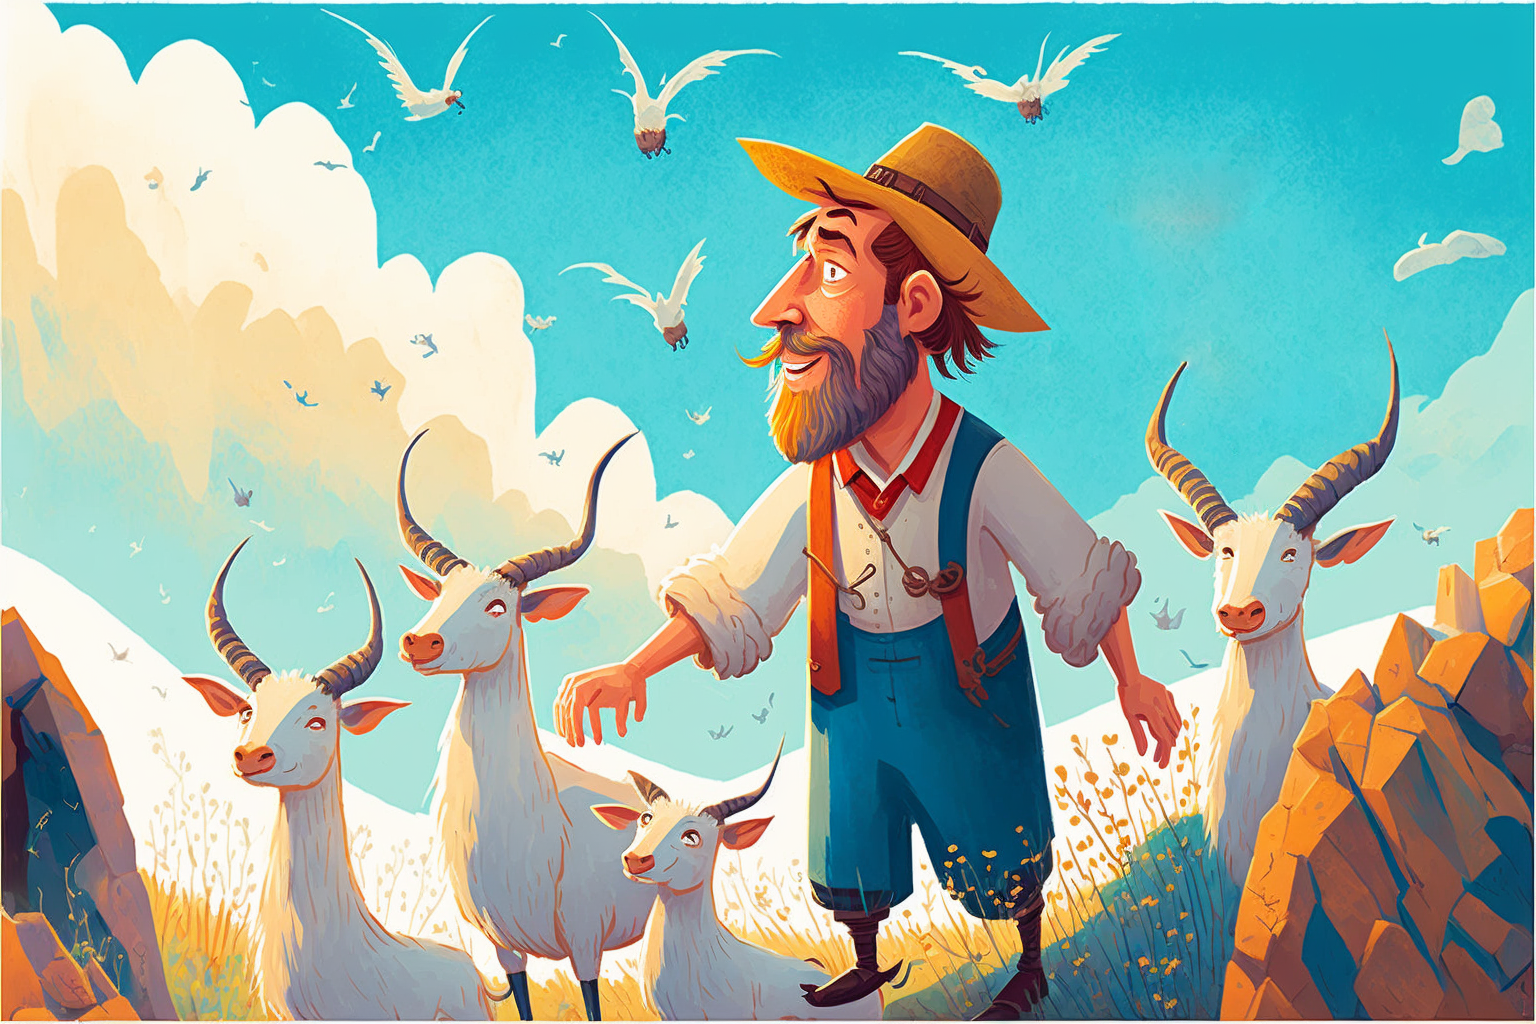 The Goatherd and the Goat